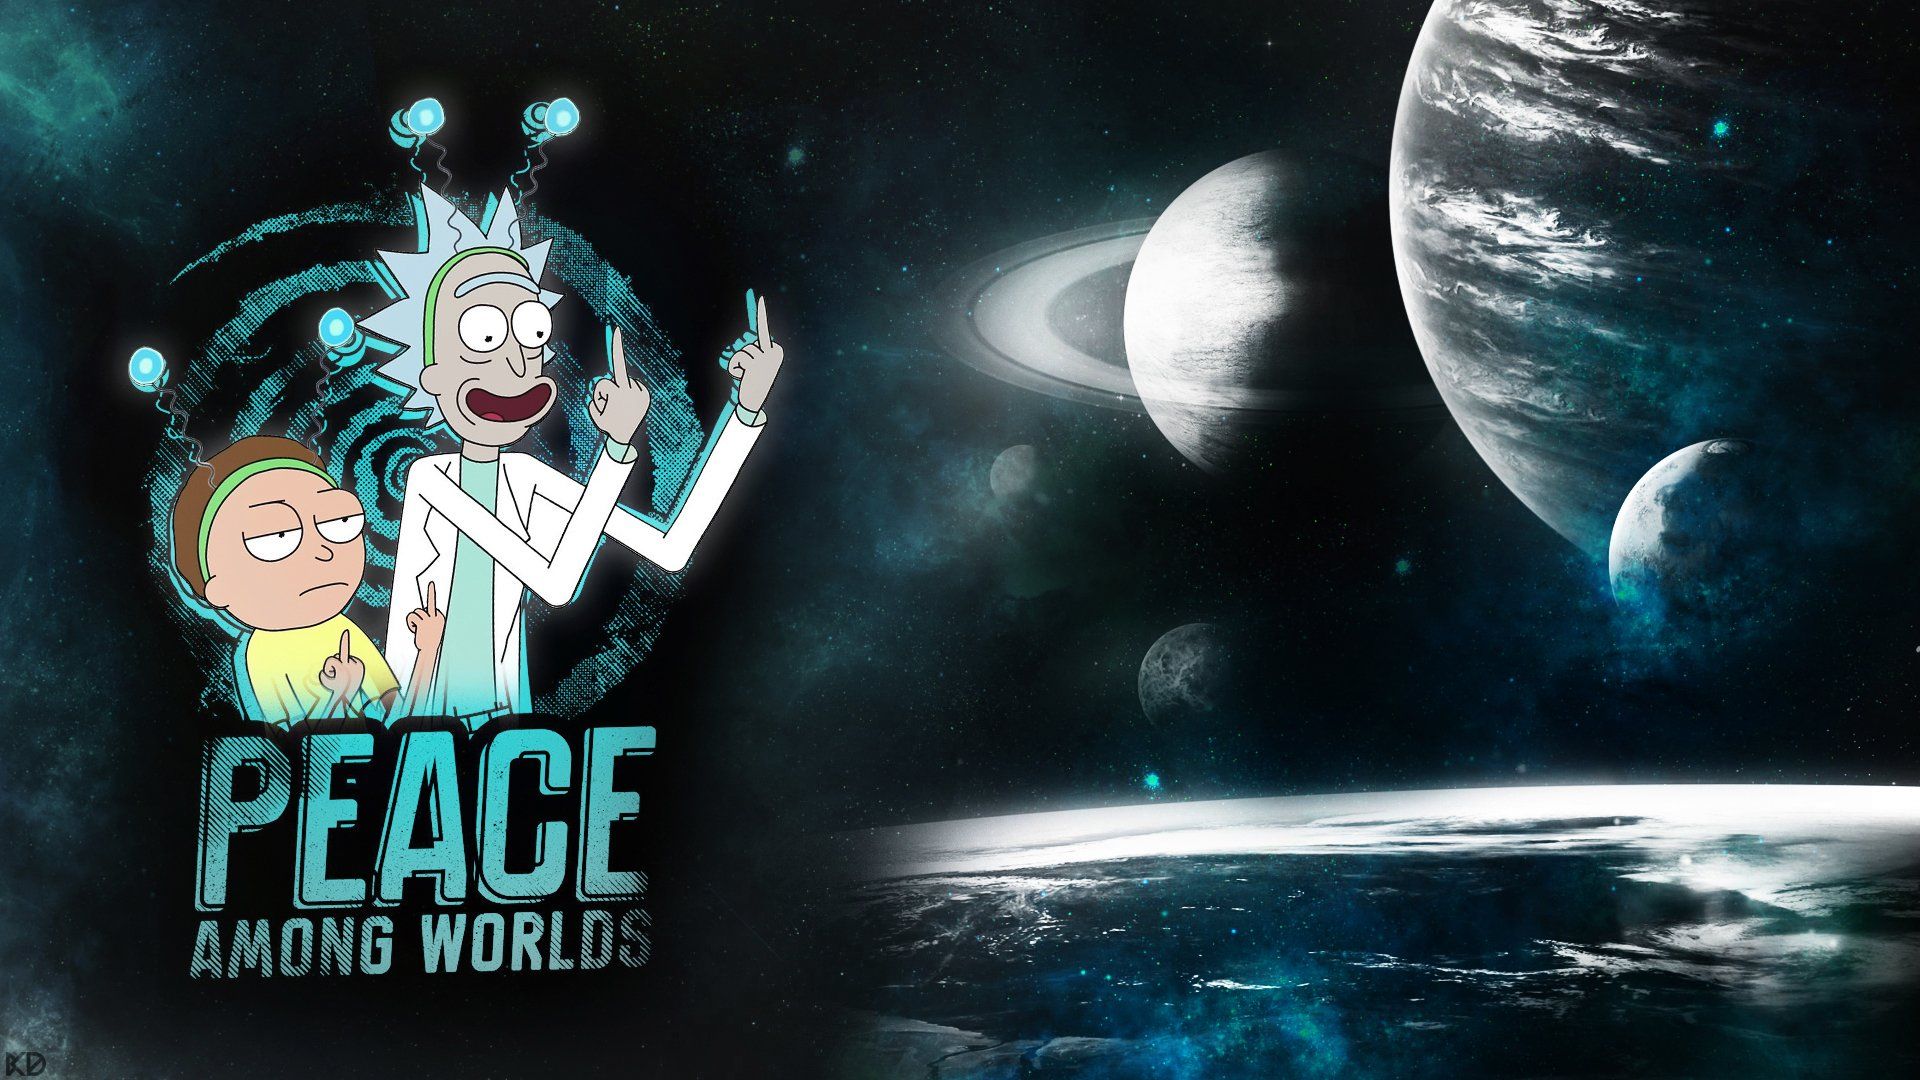 Rick and Morty Space HD Wallpaper - /s/Cinnamon